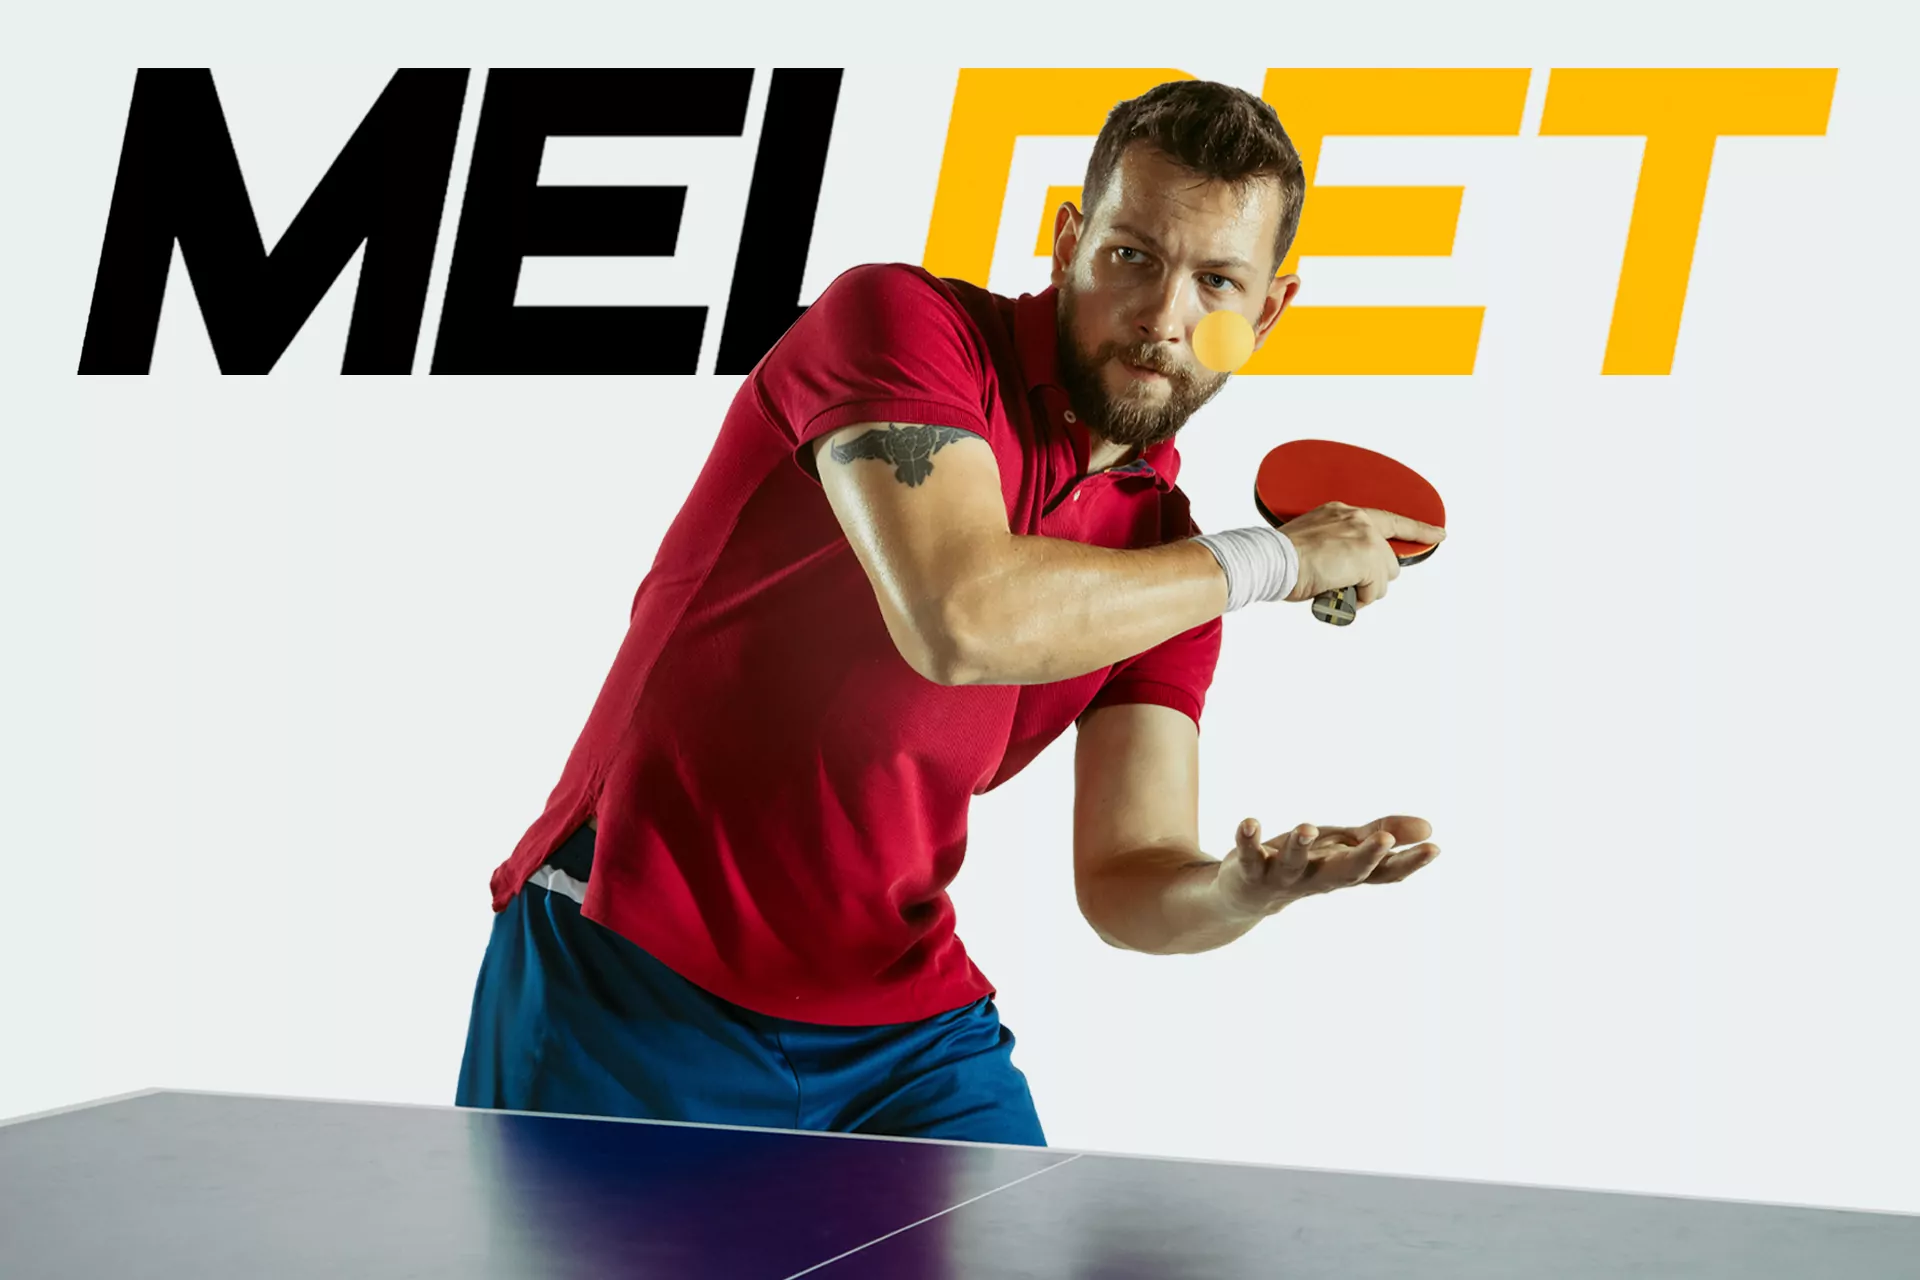 You can easily place a bet on a table tennis event at Melbet.